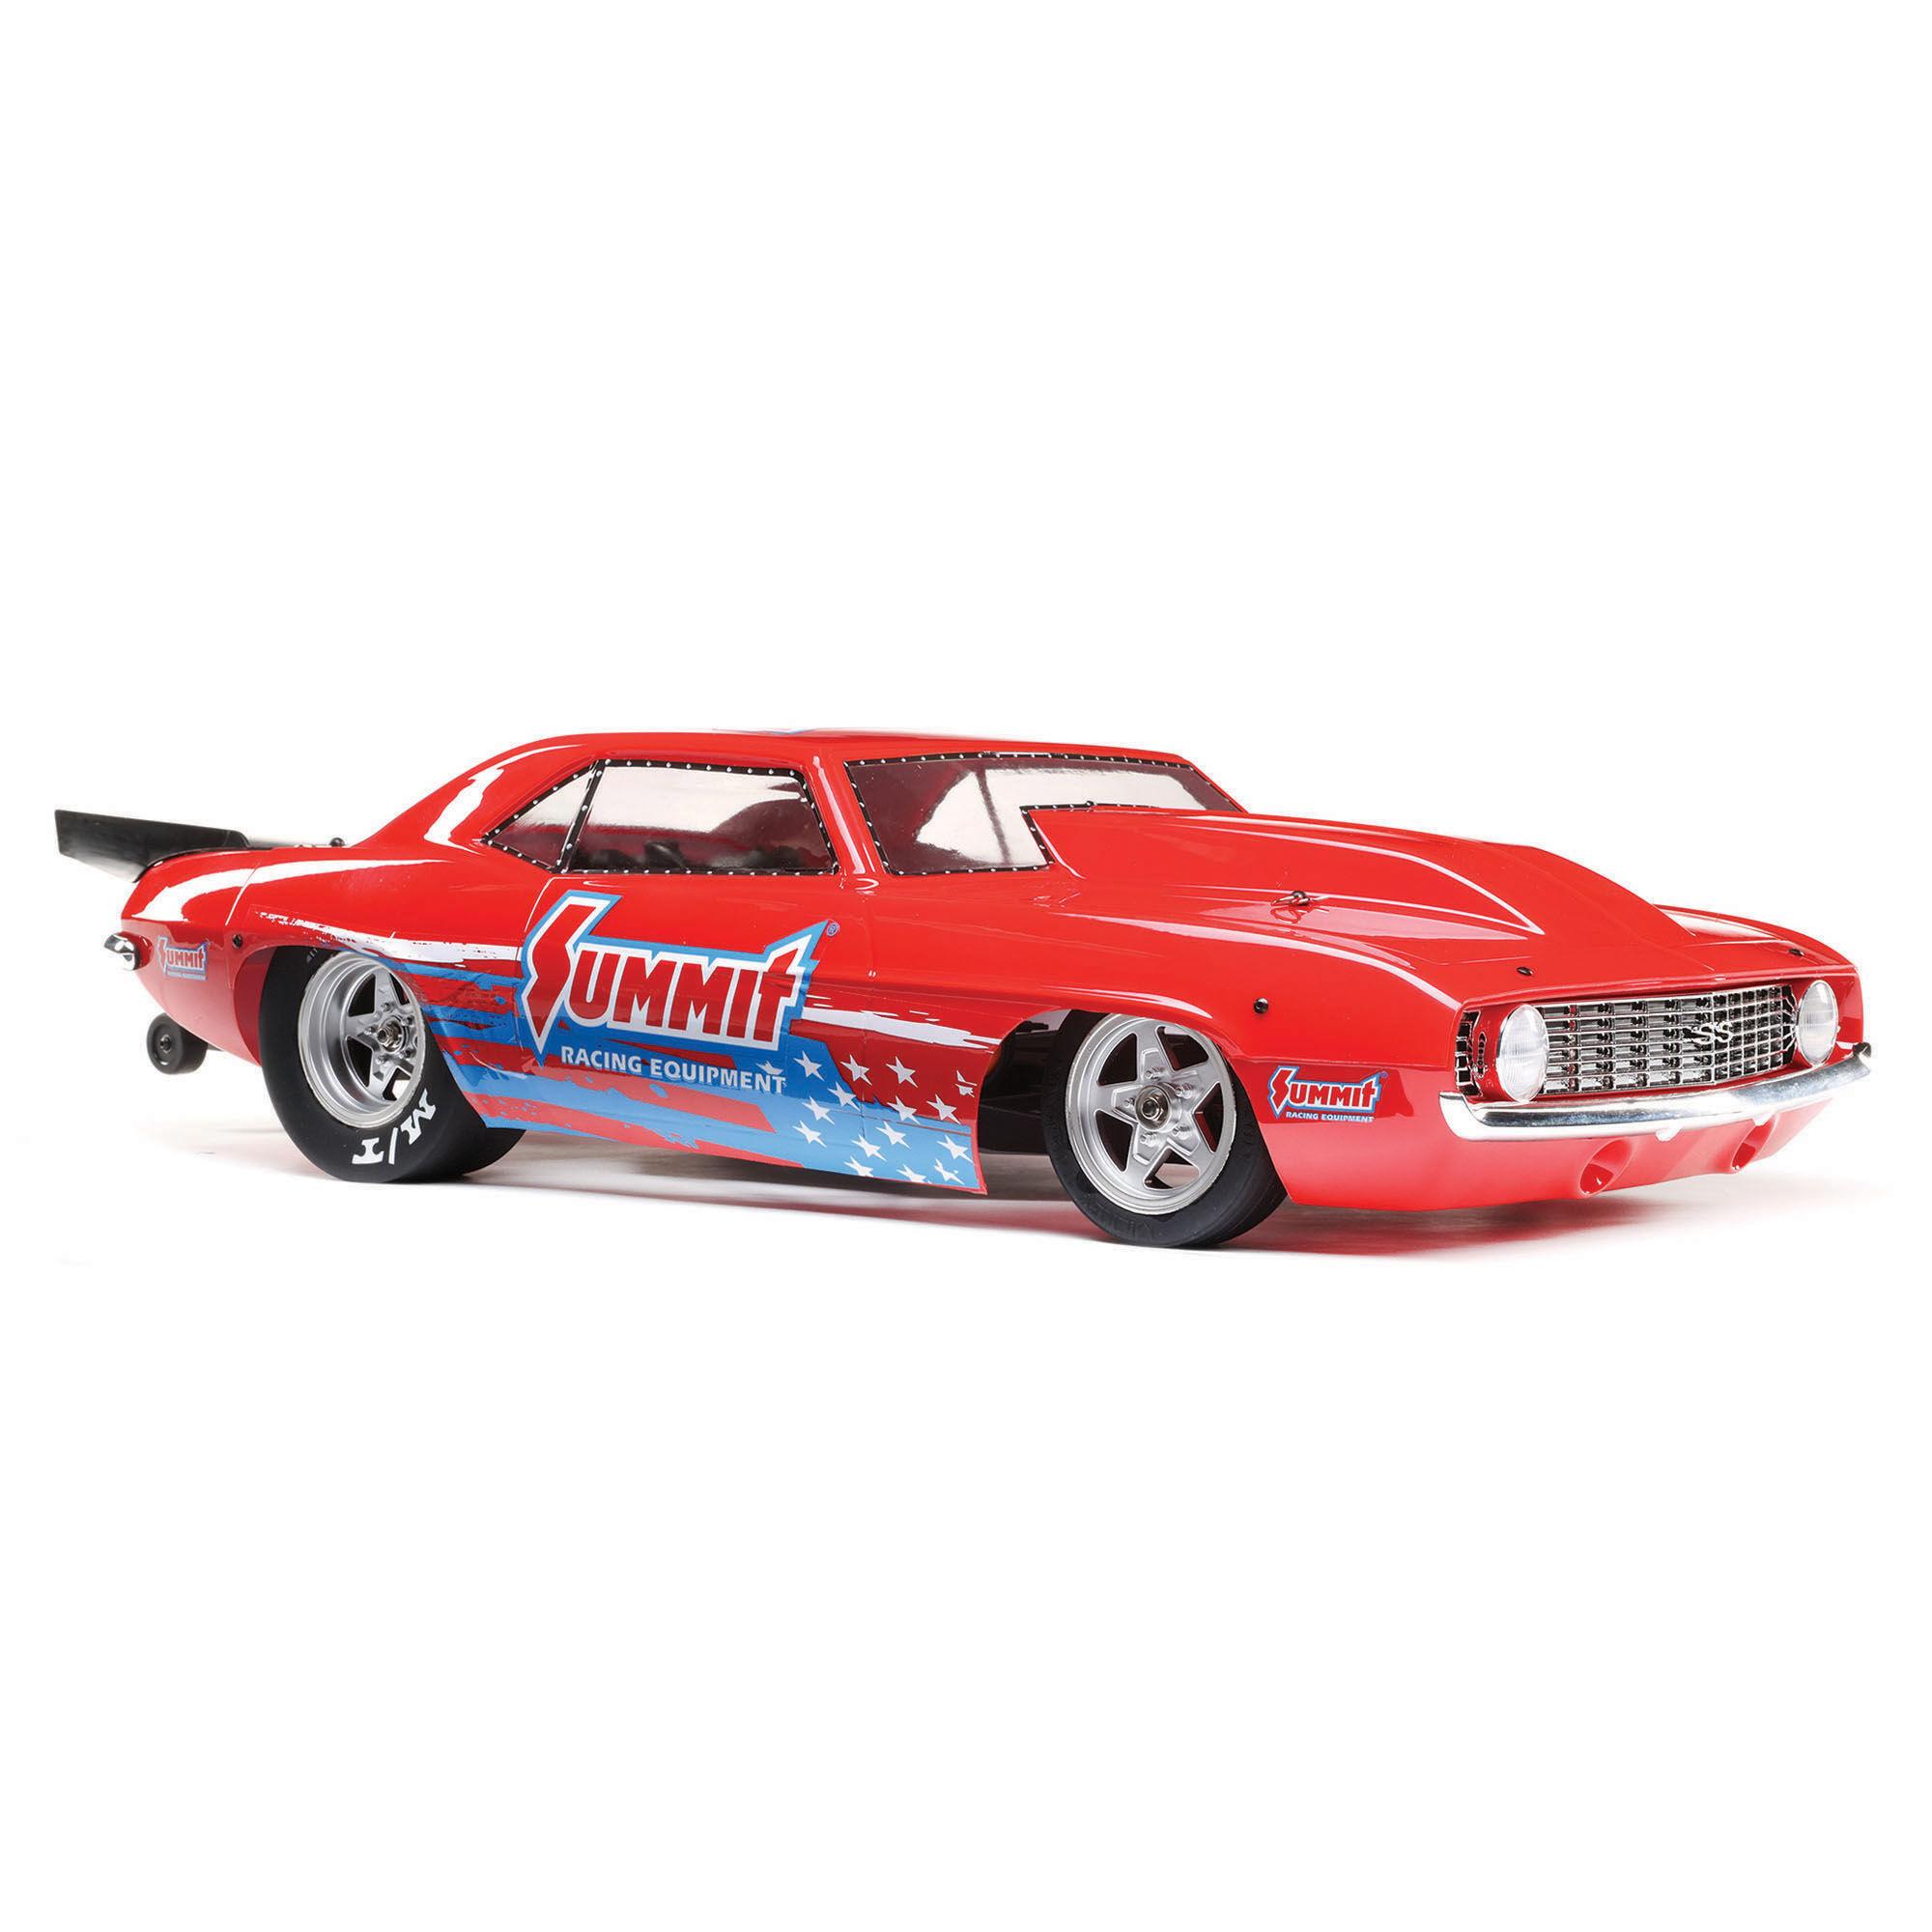 Losi 69 Camaro: Important Historical Facts About the Losi 69 Camaro